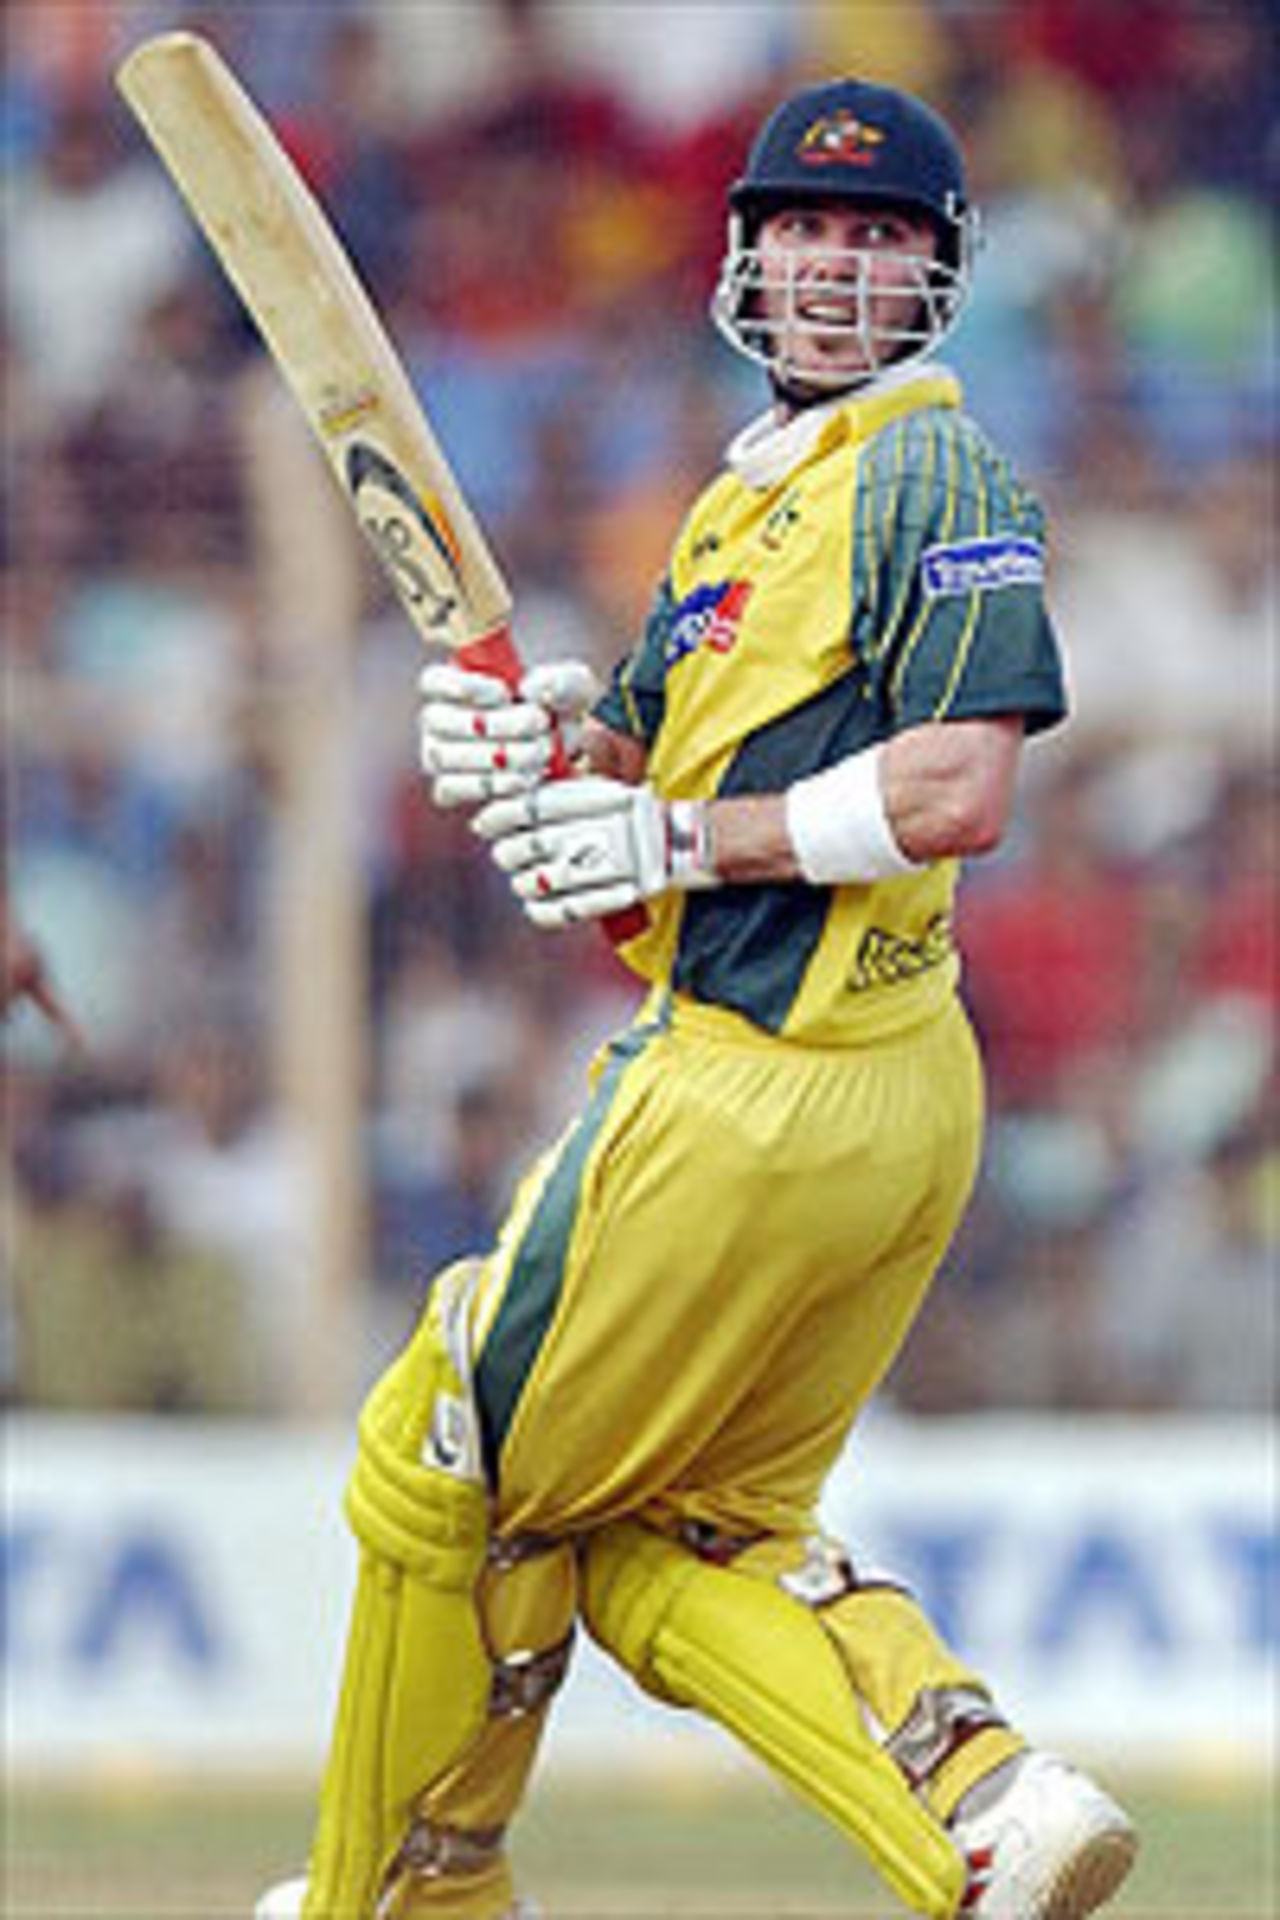 Australian batsman Damien Martyn looks back after nicking a delivery off Indian bowler Anil Kumble for a boundary taking his score to 95 during a TVS tri-series day-night game between India and Australia.at the Wankhade Stadium, Bombay, 01 November 2003.